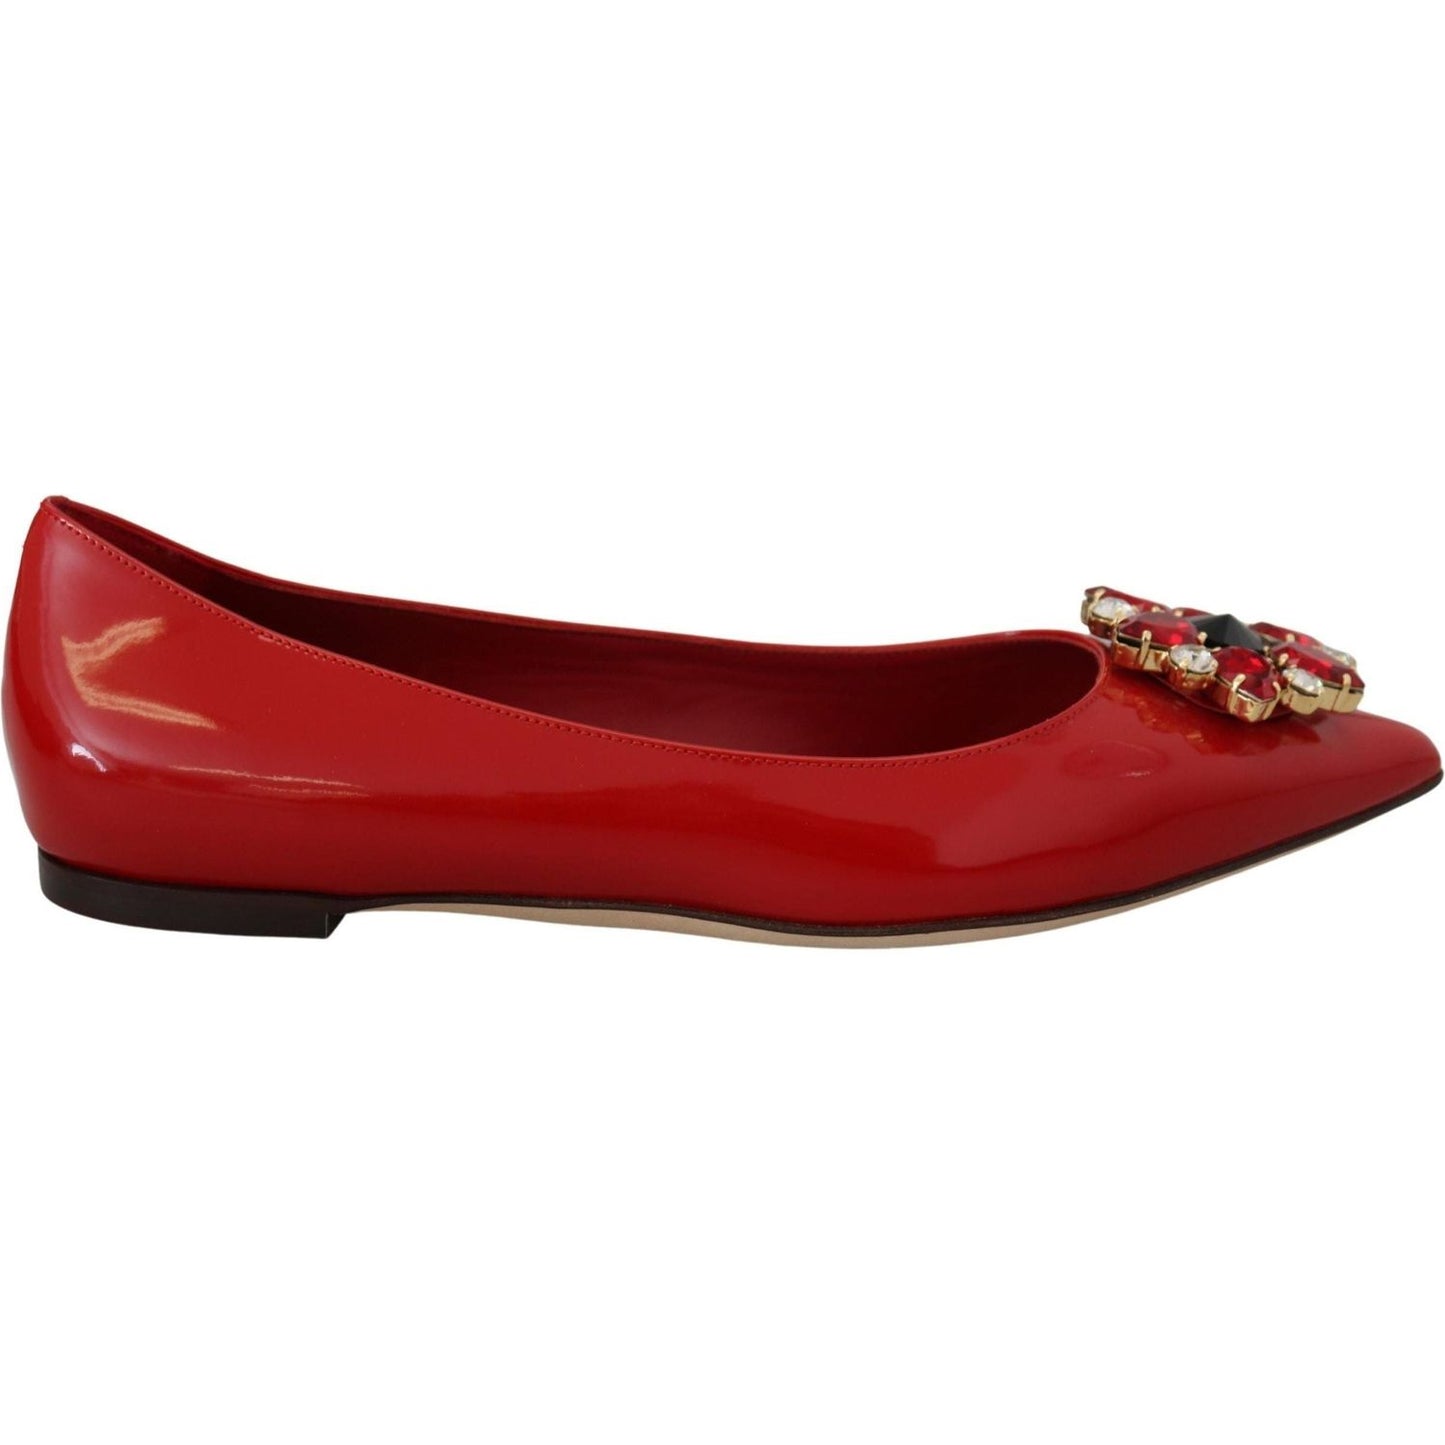 Dolce & Gabbana Red Suede Crystal Loafers - Exquisite Elegance red-leather-crystals-loafers-flats-shoes IMG_8712-scaled-e409c3f2-9d9.jpg